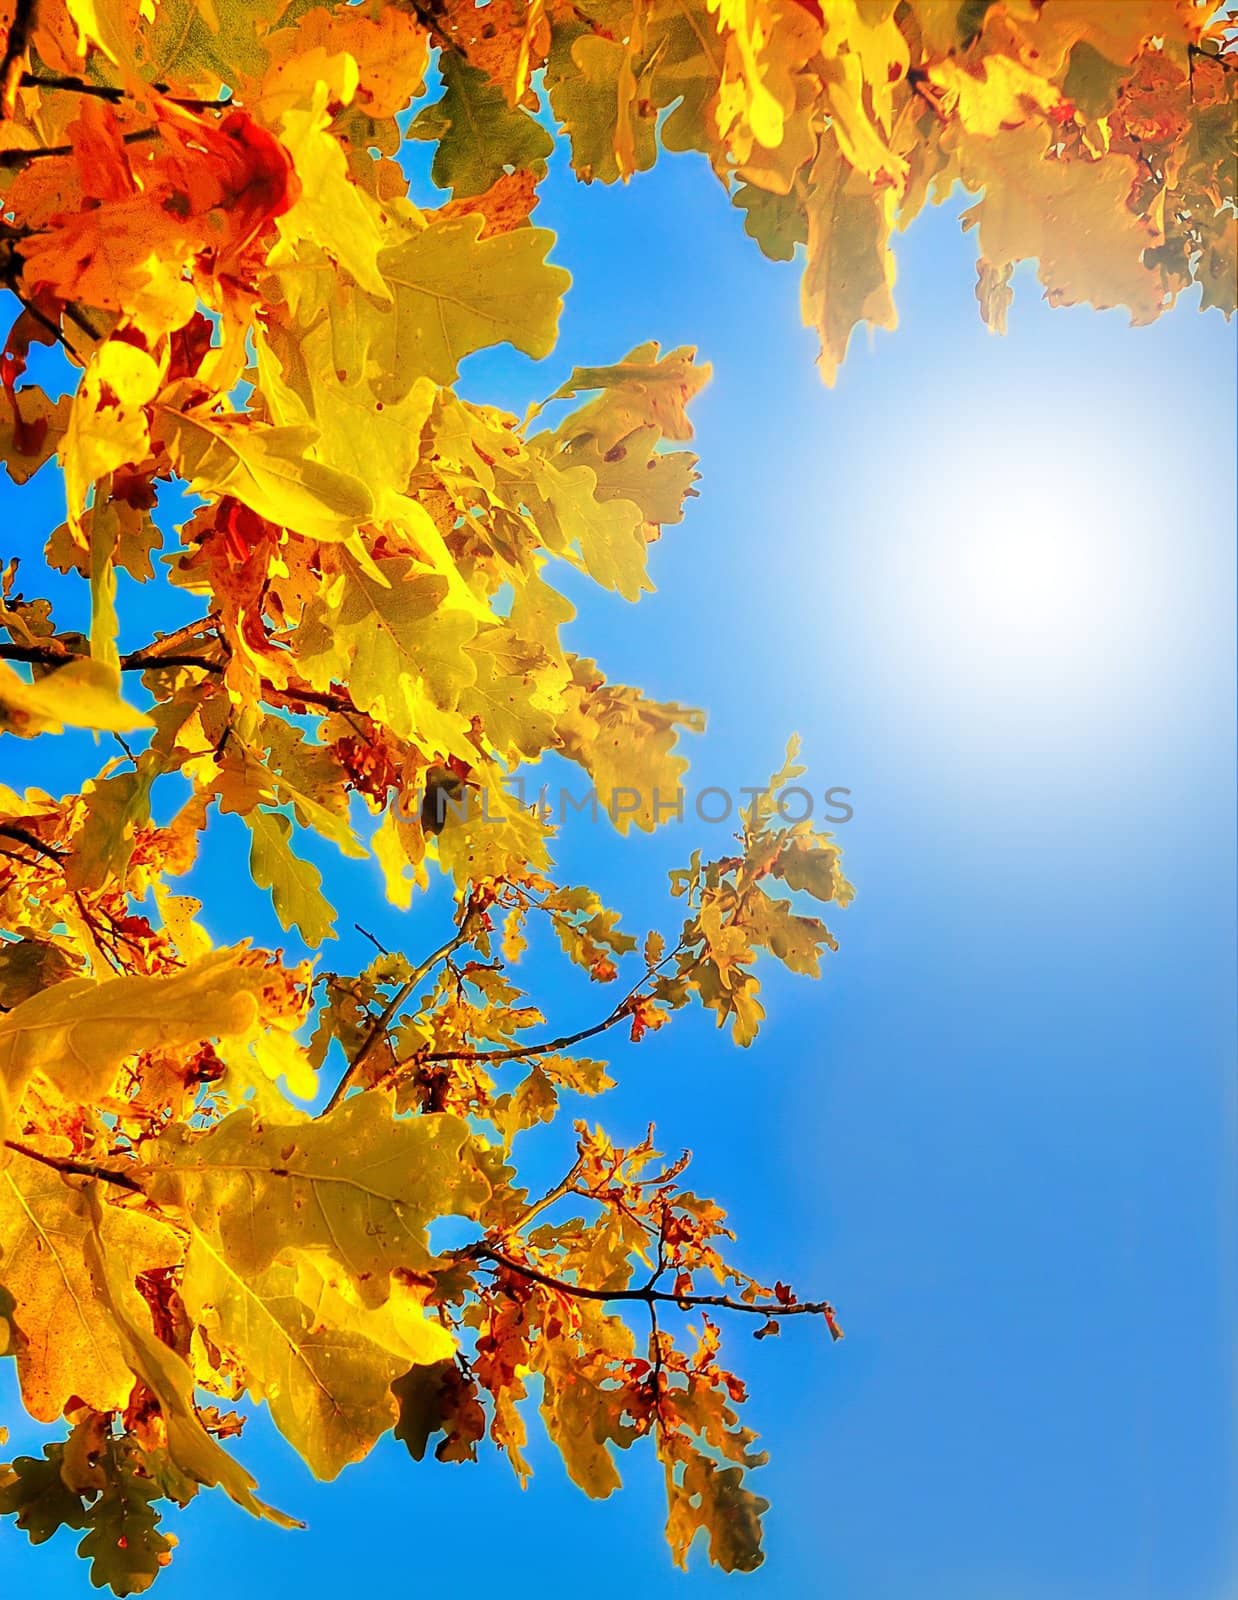 Autumn oak leaves against the blue sky with bright sunshine